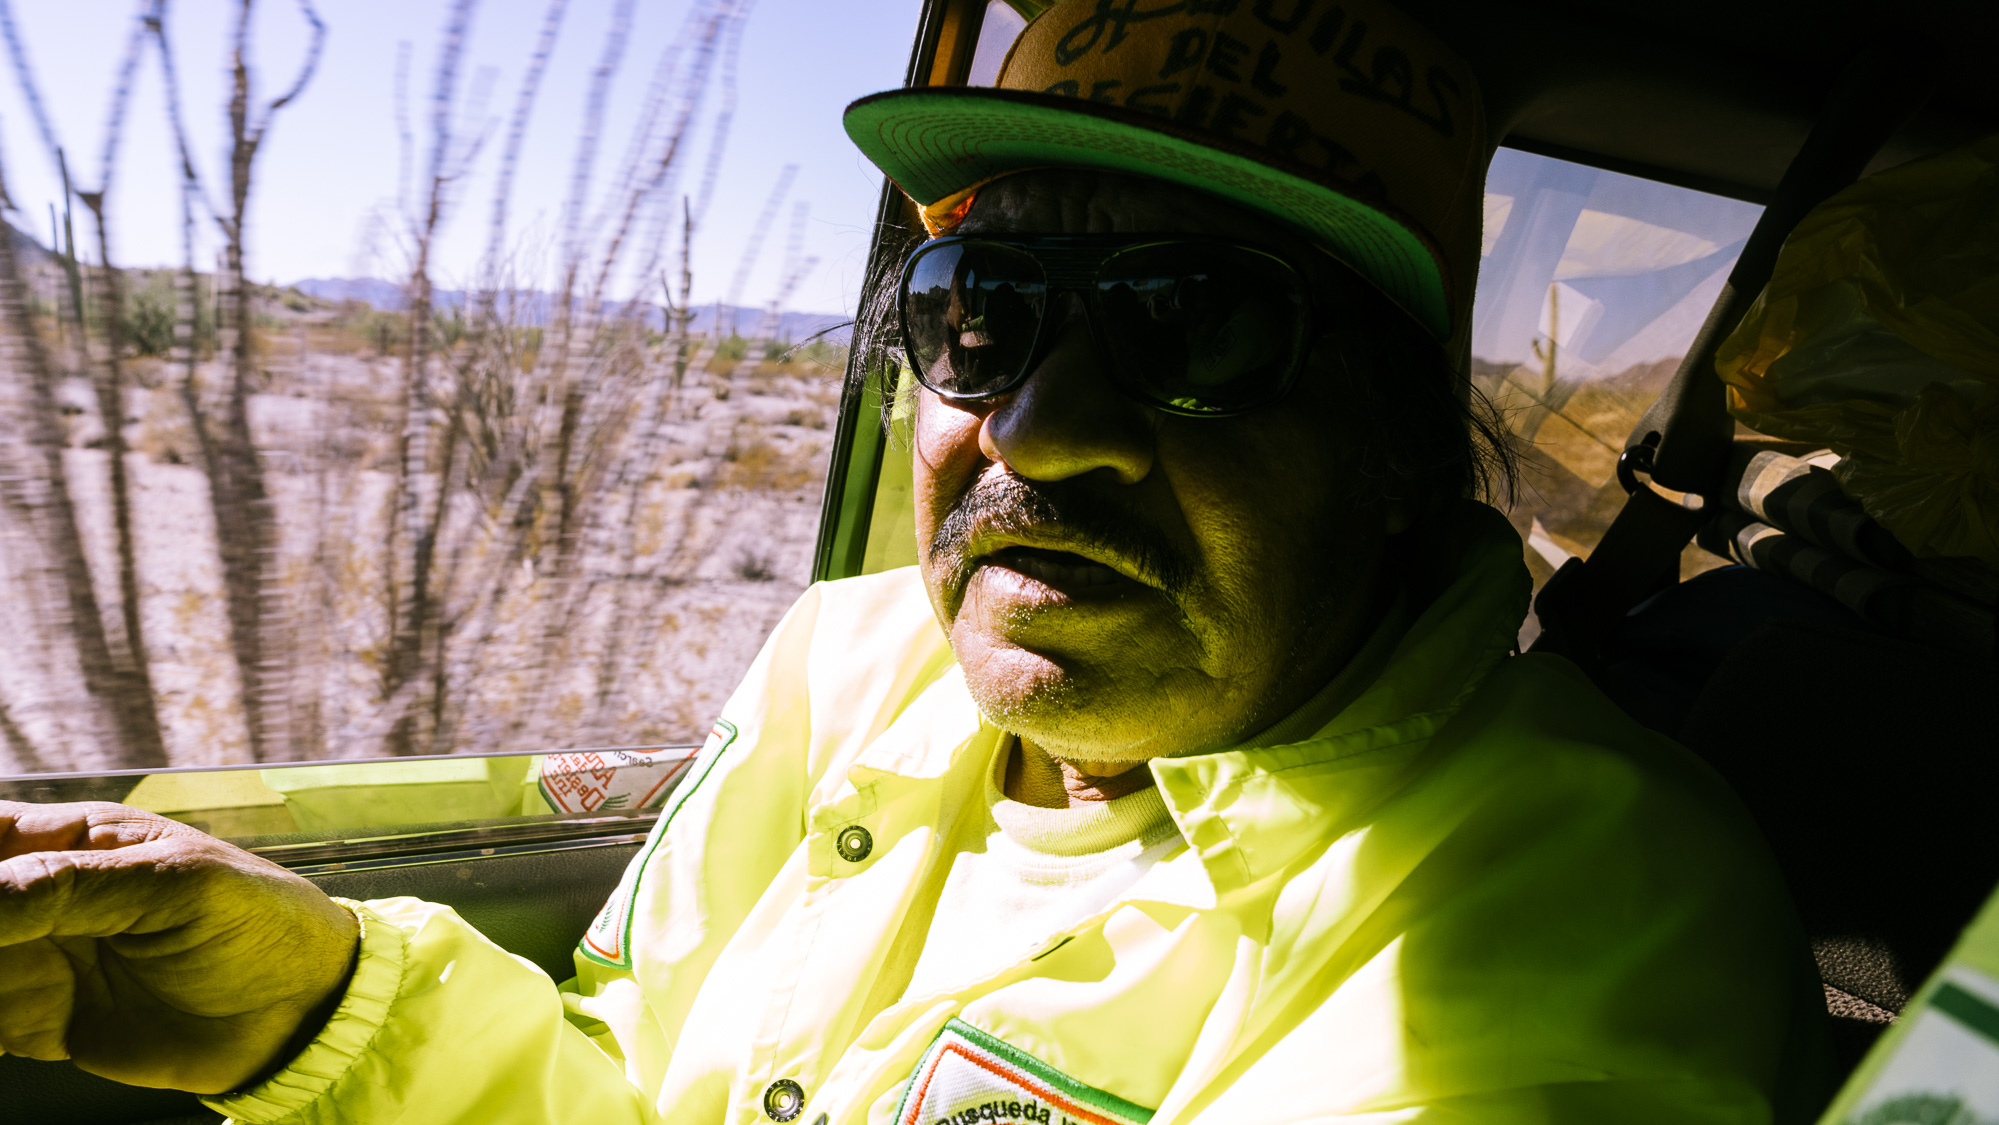  IMAGE CAPTION:  Eli Leon, a Mexican construction worker who lives in Reseda, California on the way to the Sonoran Desert with Aguilas Del Desierto, an immigrant to migrant search and rescue organization. They search on weekends for deceased and lost